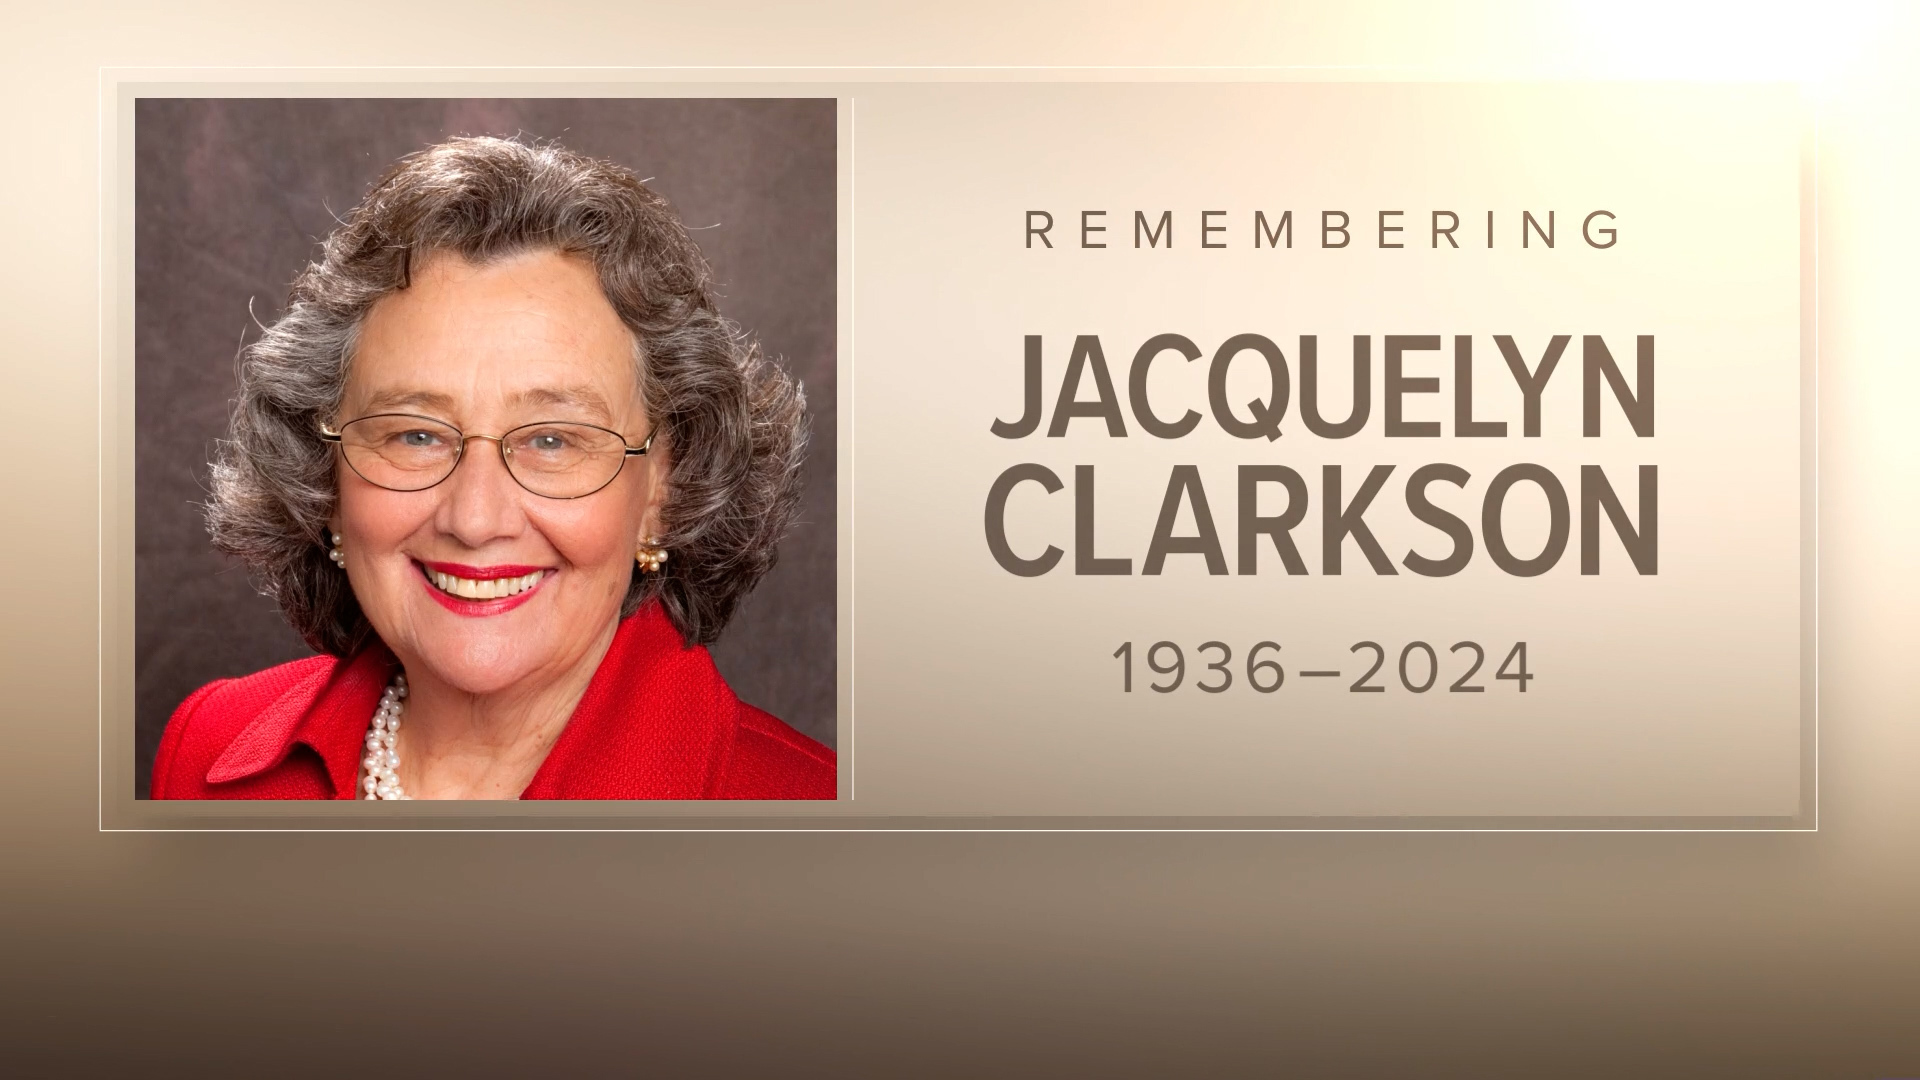 Jackie Clarkson died Wednesday after a brief illness and hospitalization at the age of 88.